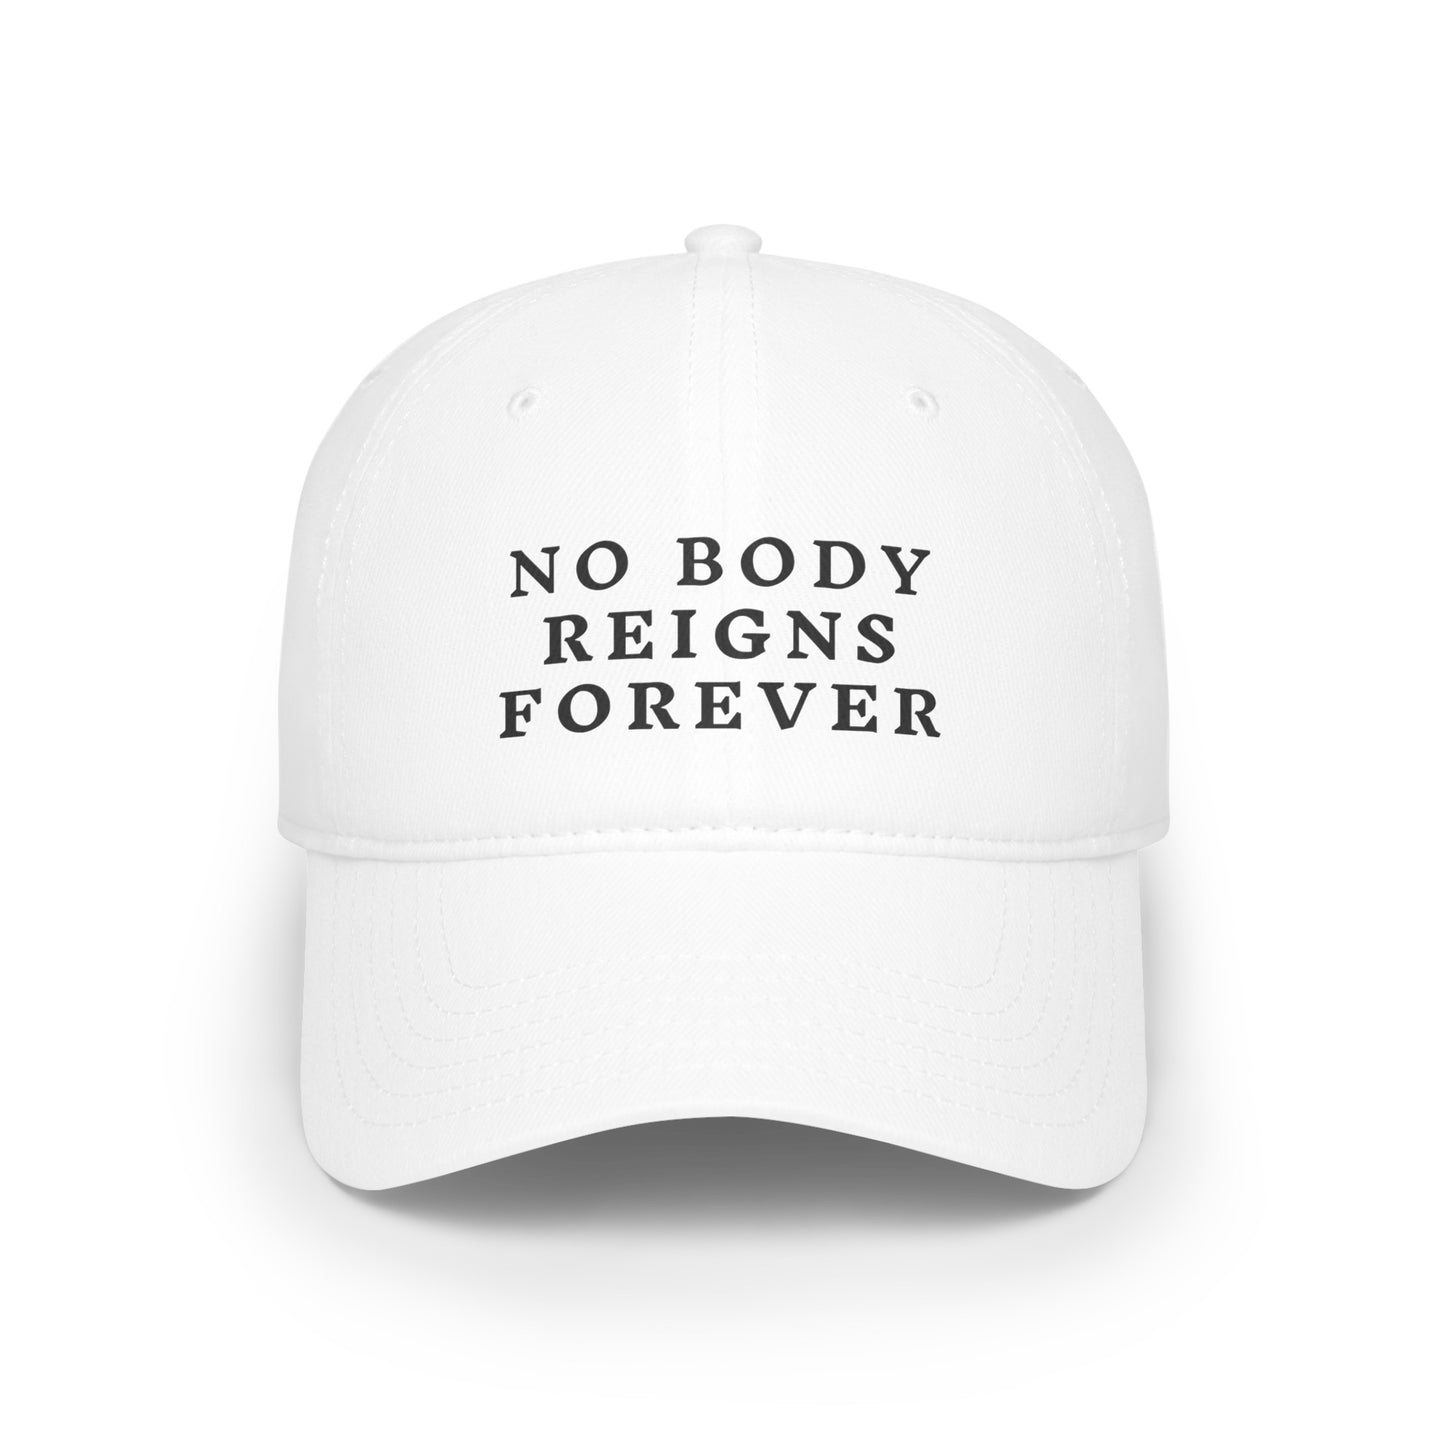 No Body Reigns Forever Hat